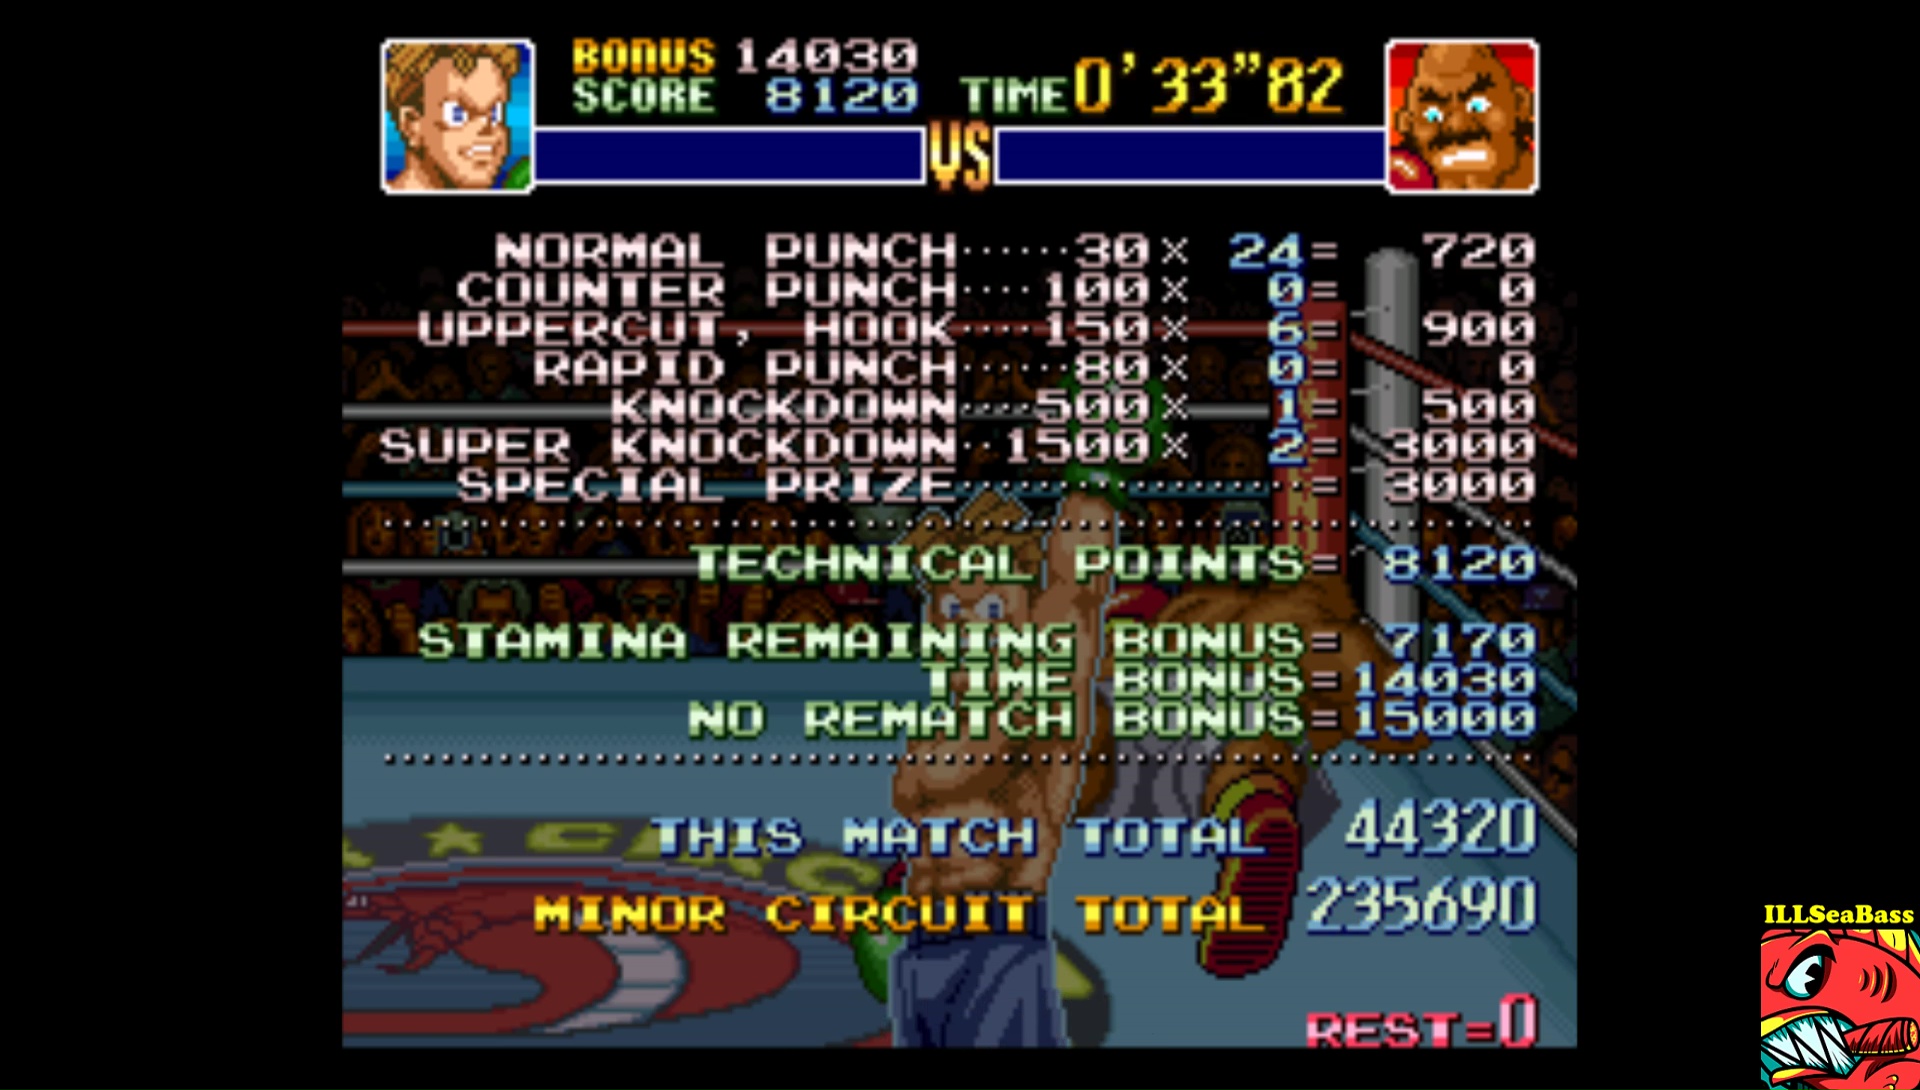 ILLSeaBass: Super Punch-Out!! [Bald Bull] (SNES/Super Famicom Emulated) 44,320 points on 2017-09-08 18:16:33